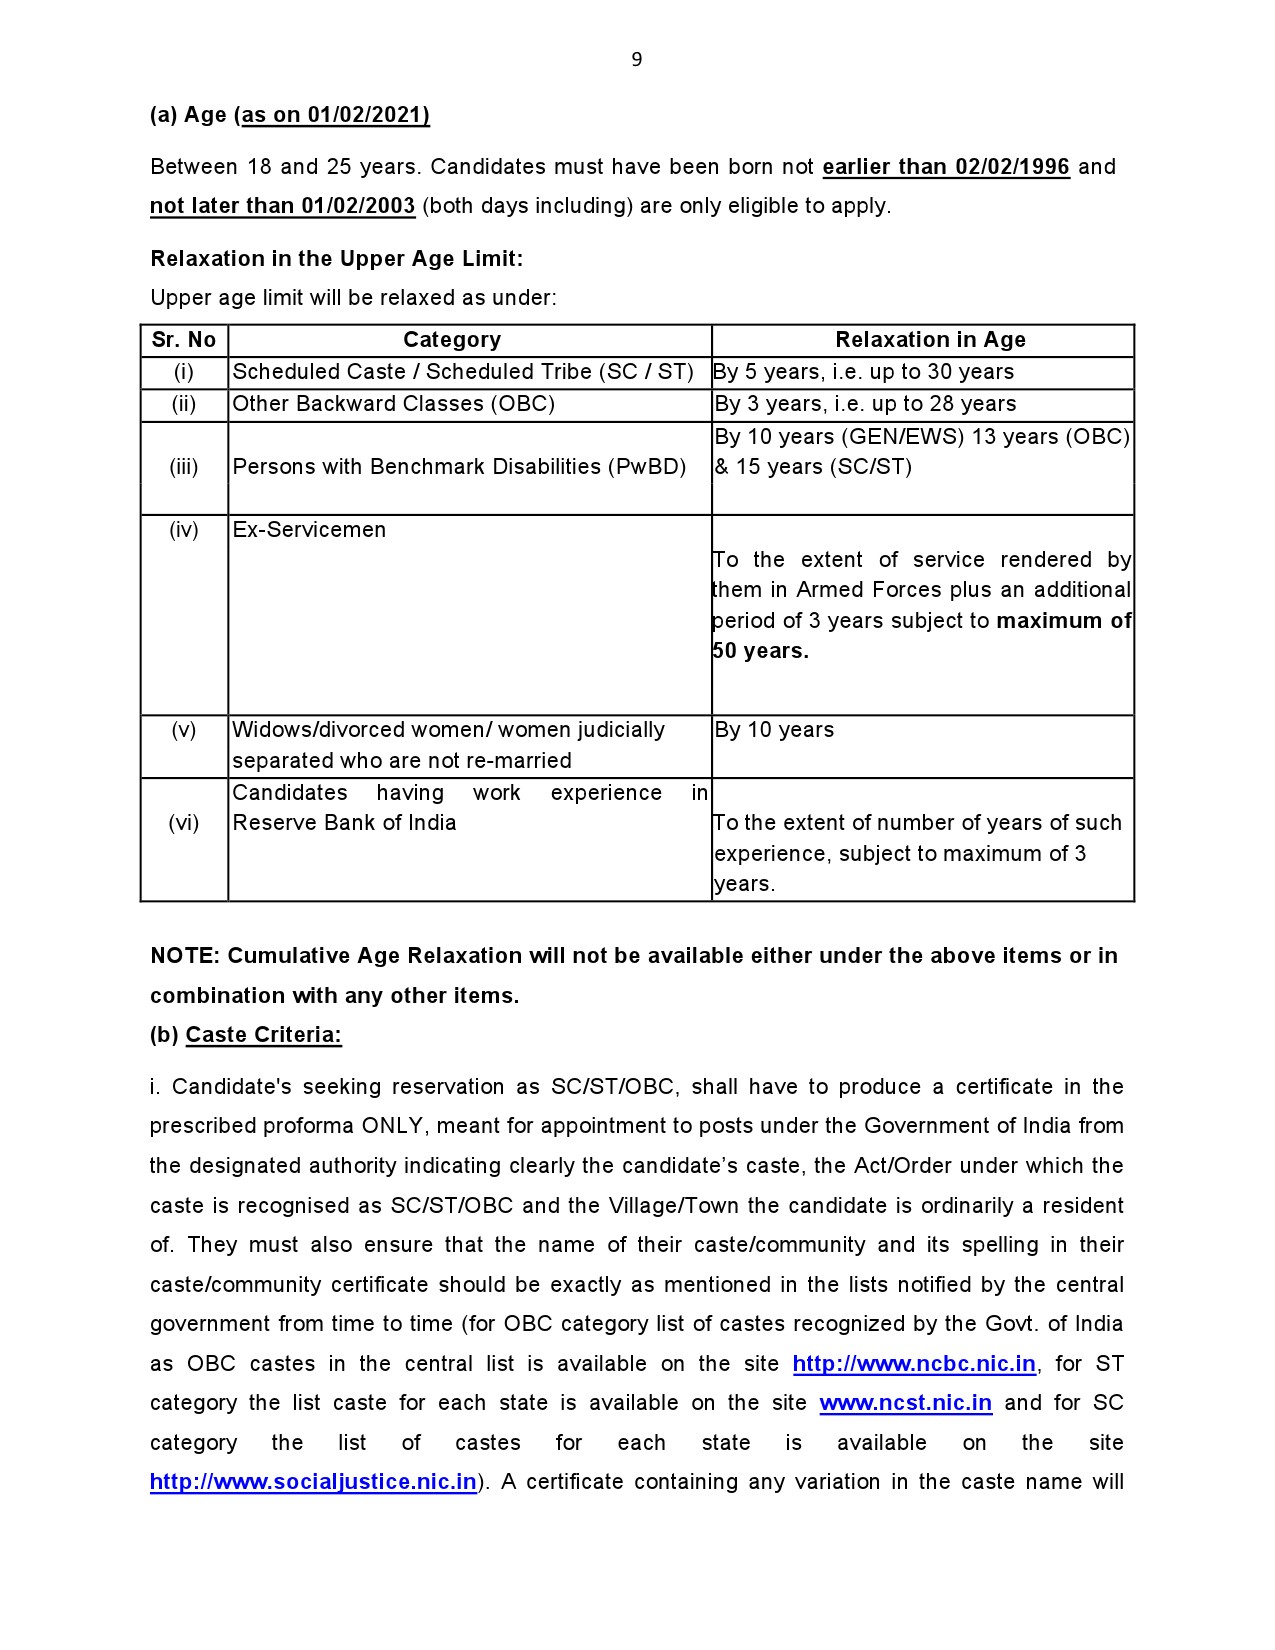 RECRUITMENT FOR THE POST OF OFFICE ATTENDANTS 2020 - Notification Image 9